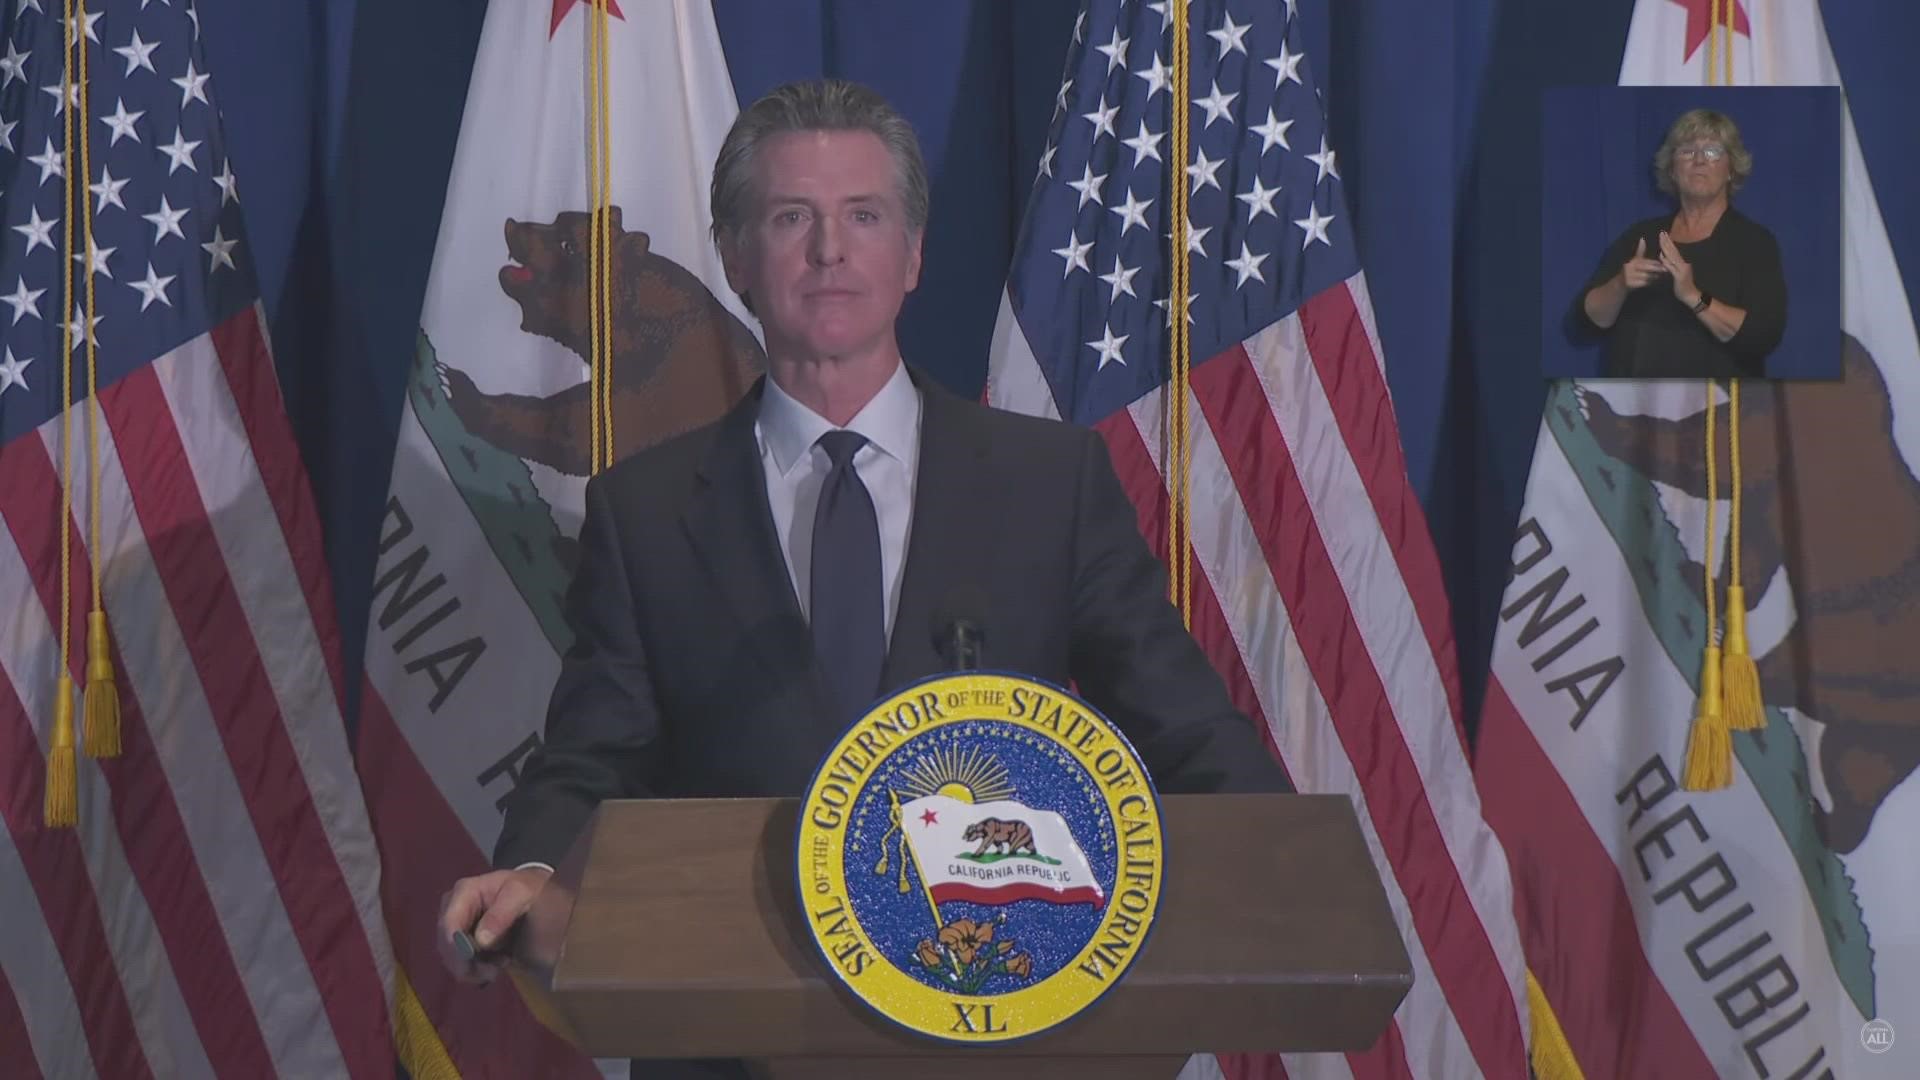 Gov. Gavin Newsom answers questions from the audience on the revised budget.